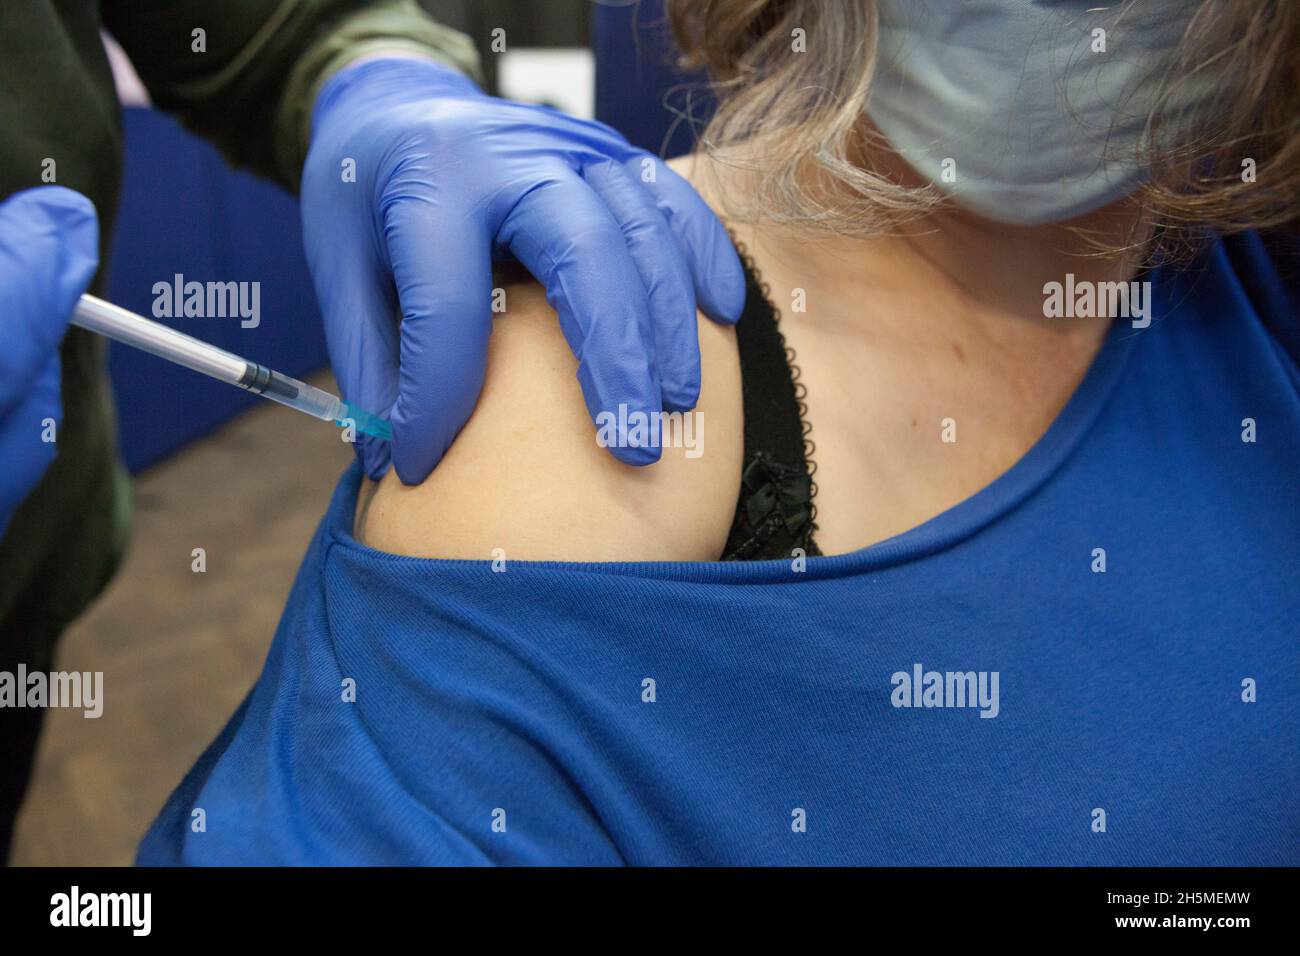 London, UK, 10 November 2021: at a vaccination centre next to Kennington Oval cricket ground a steady stream of people attend to get their booster jabs or first jabs of Pfizer coronavirus vaccine. The photographer receives her booster dose.  Anna Watson/Alamy Live News Stock Photo